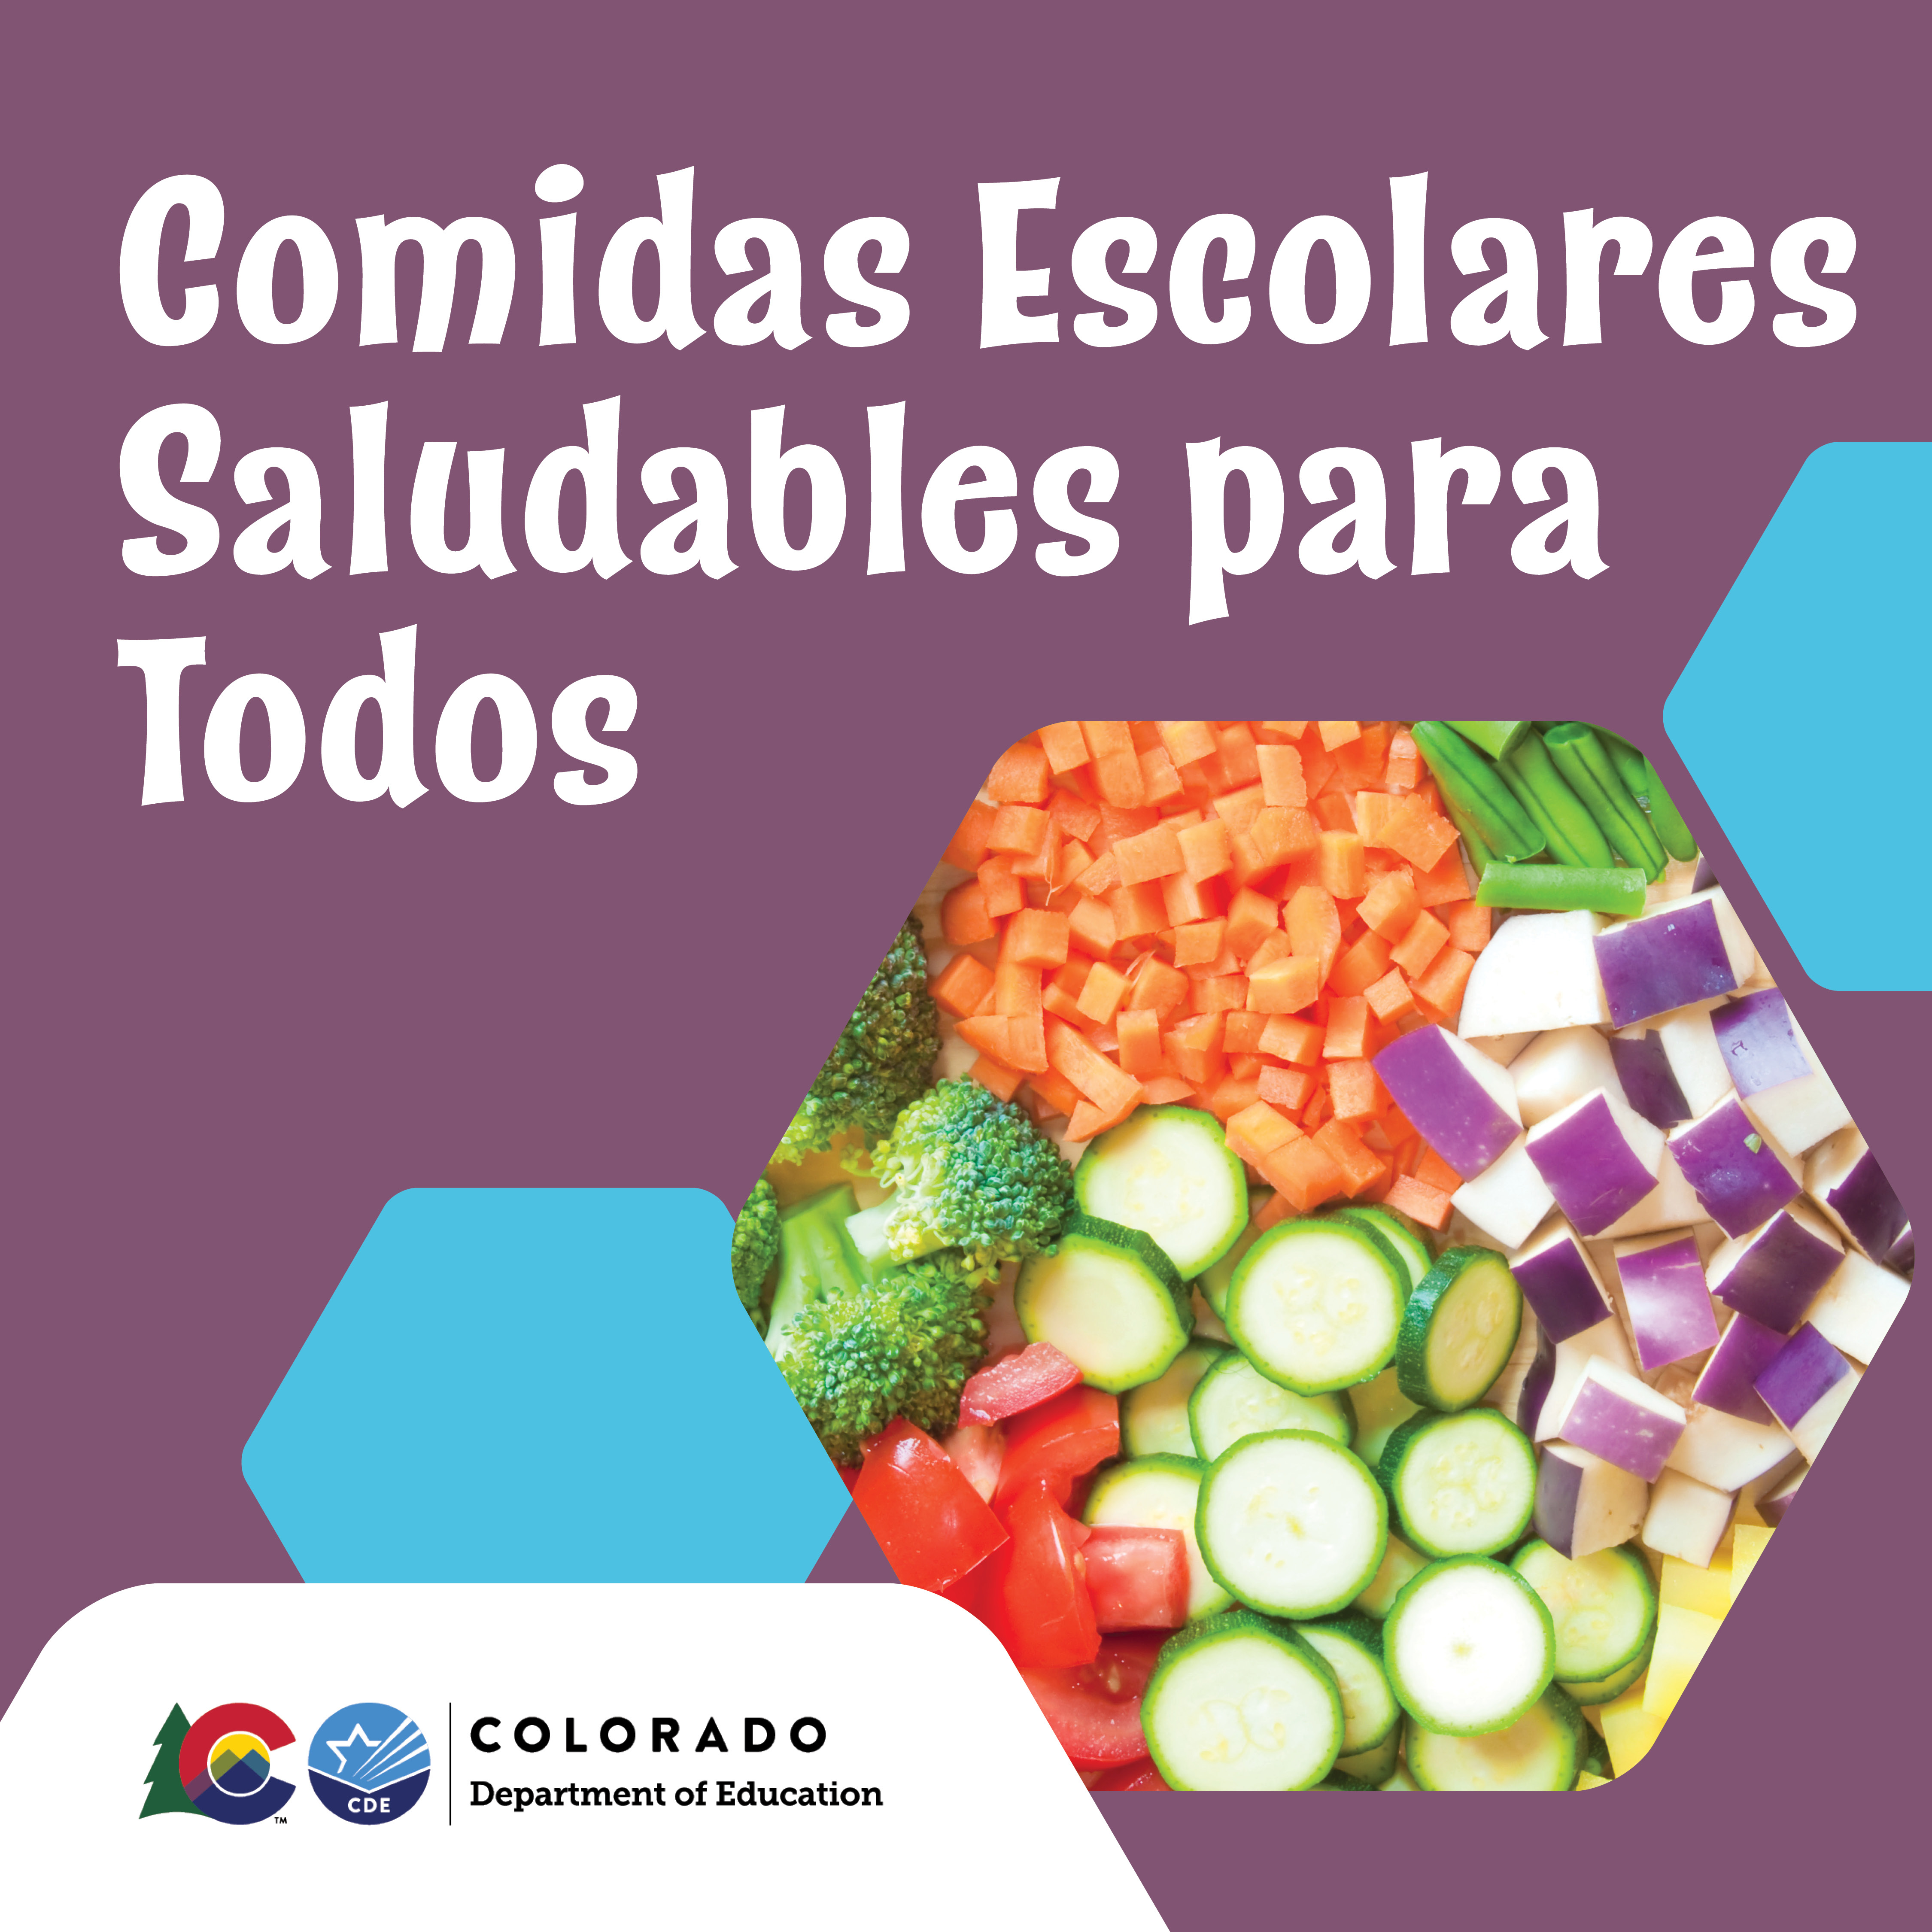  Healthy School Meals Colorado Department of Education social media image with text and veggies in Spanish